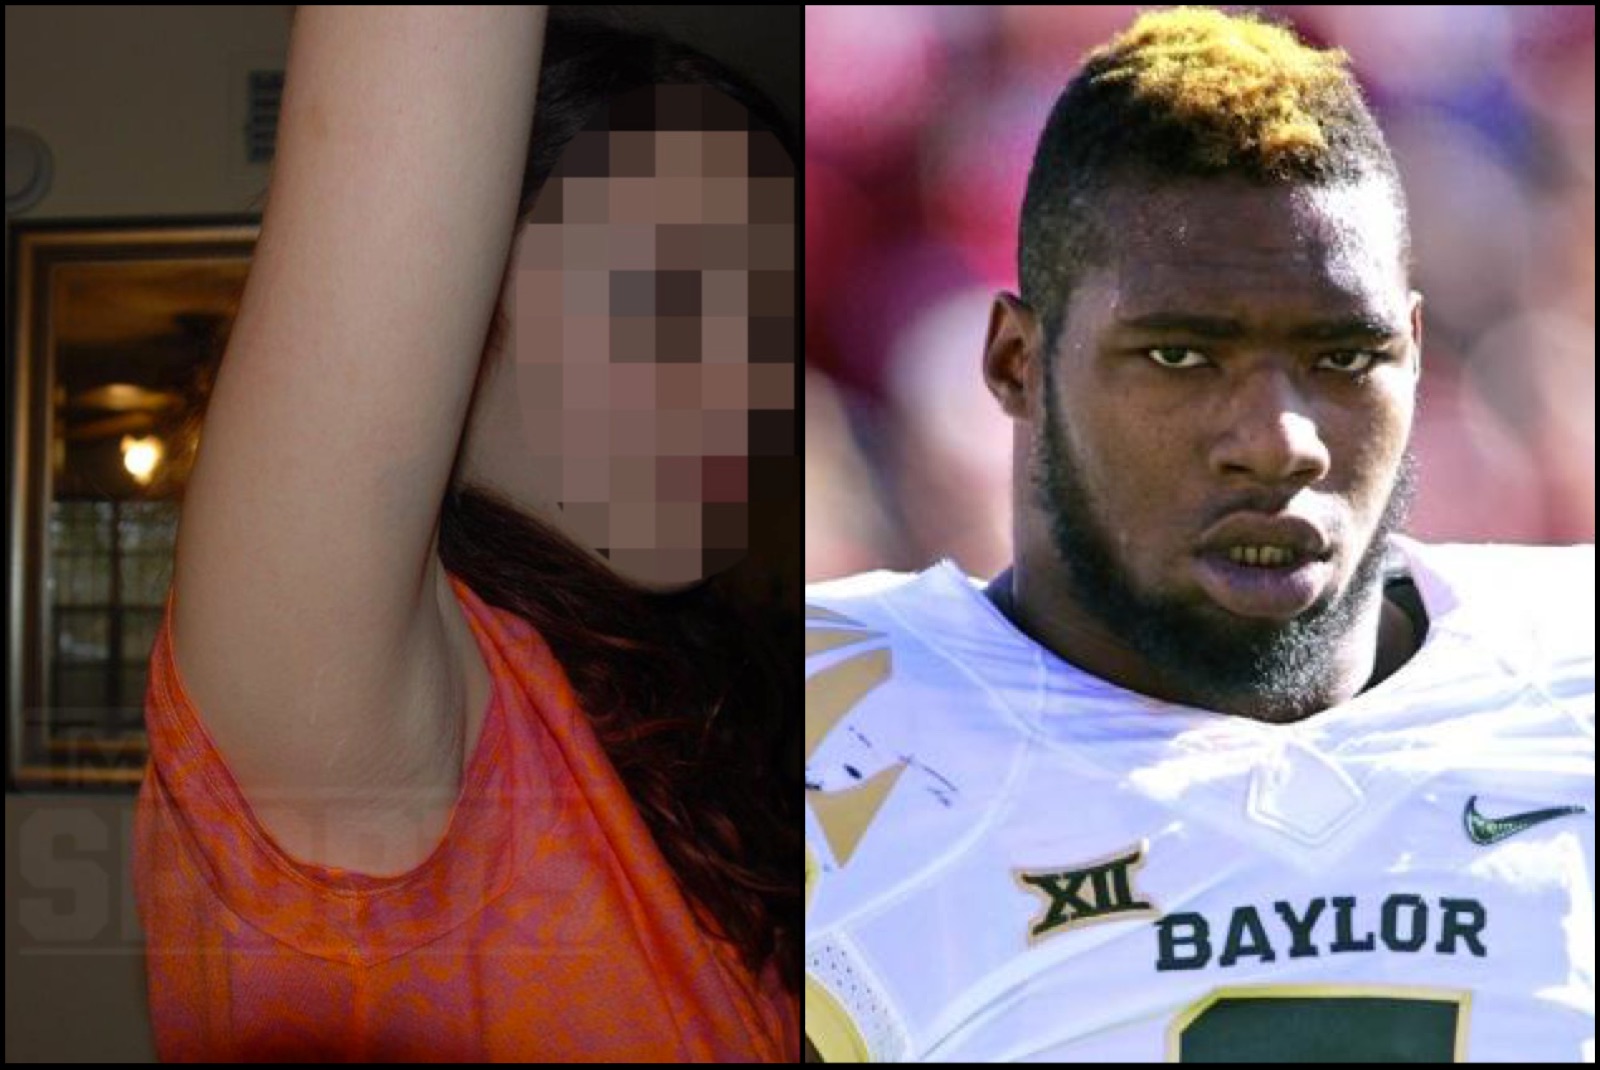 Shawn Oakman is currently accused of raping a woman